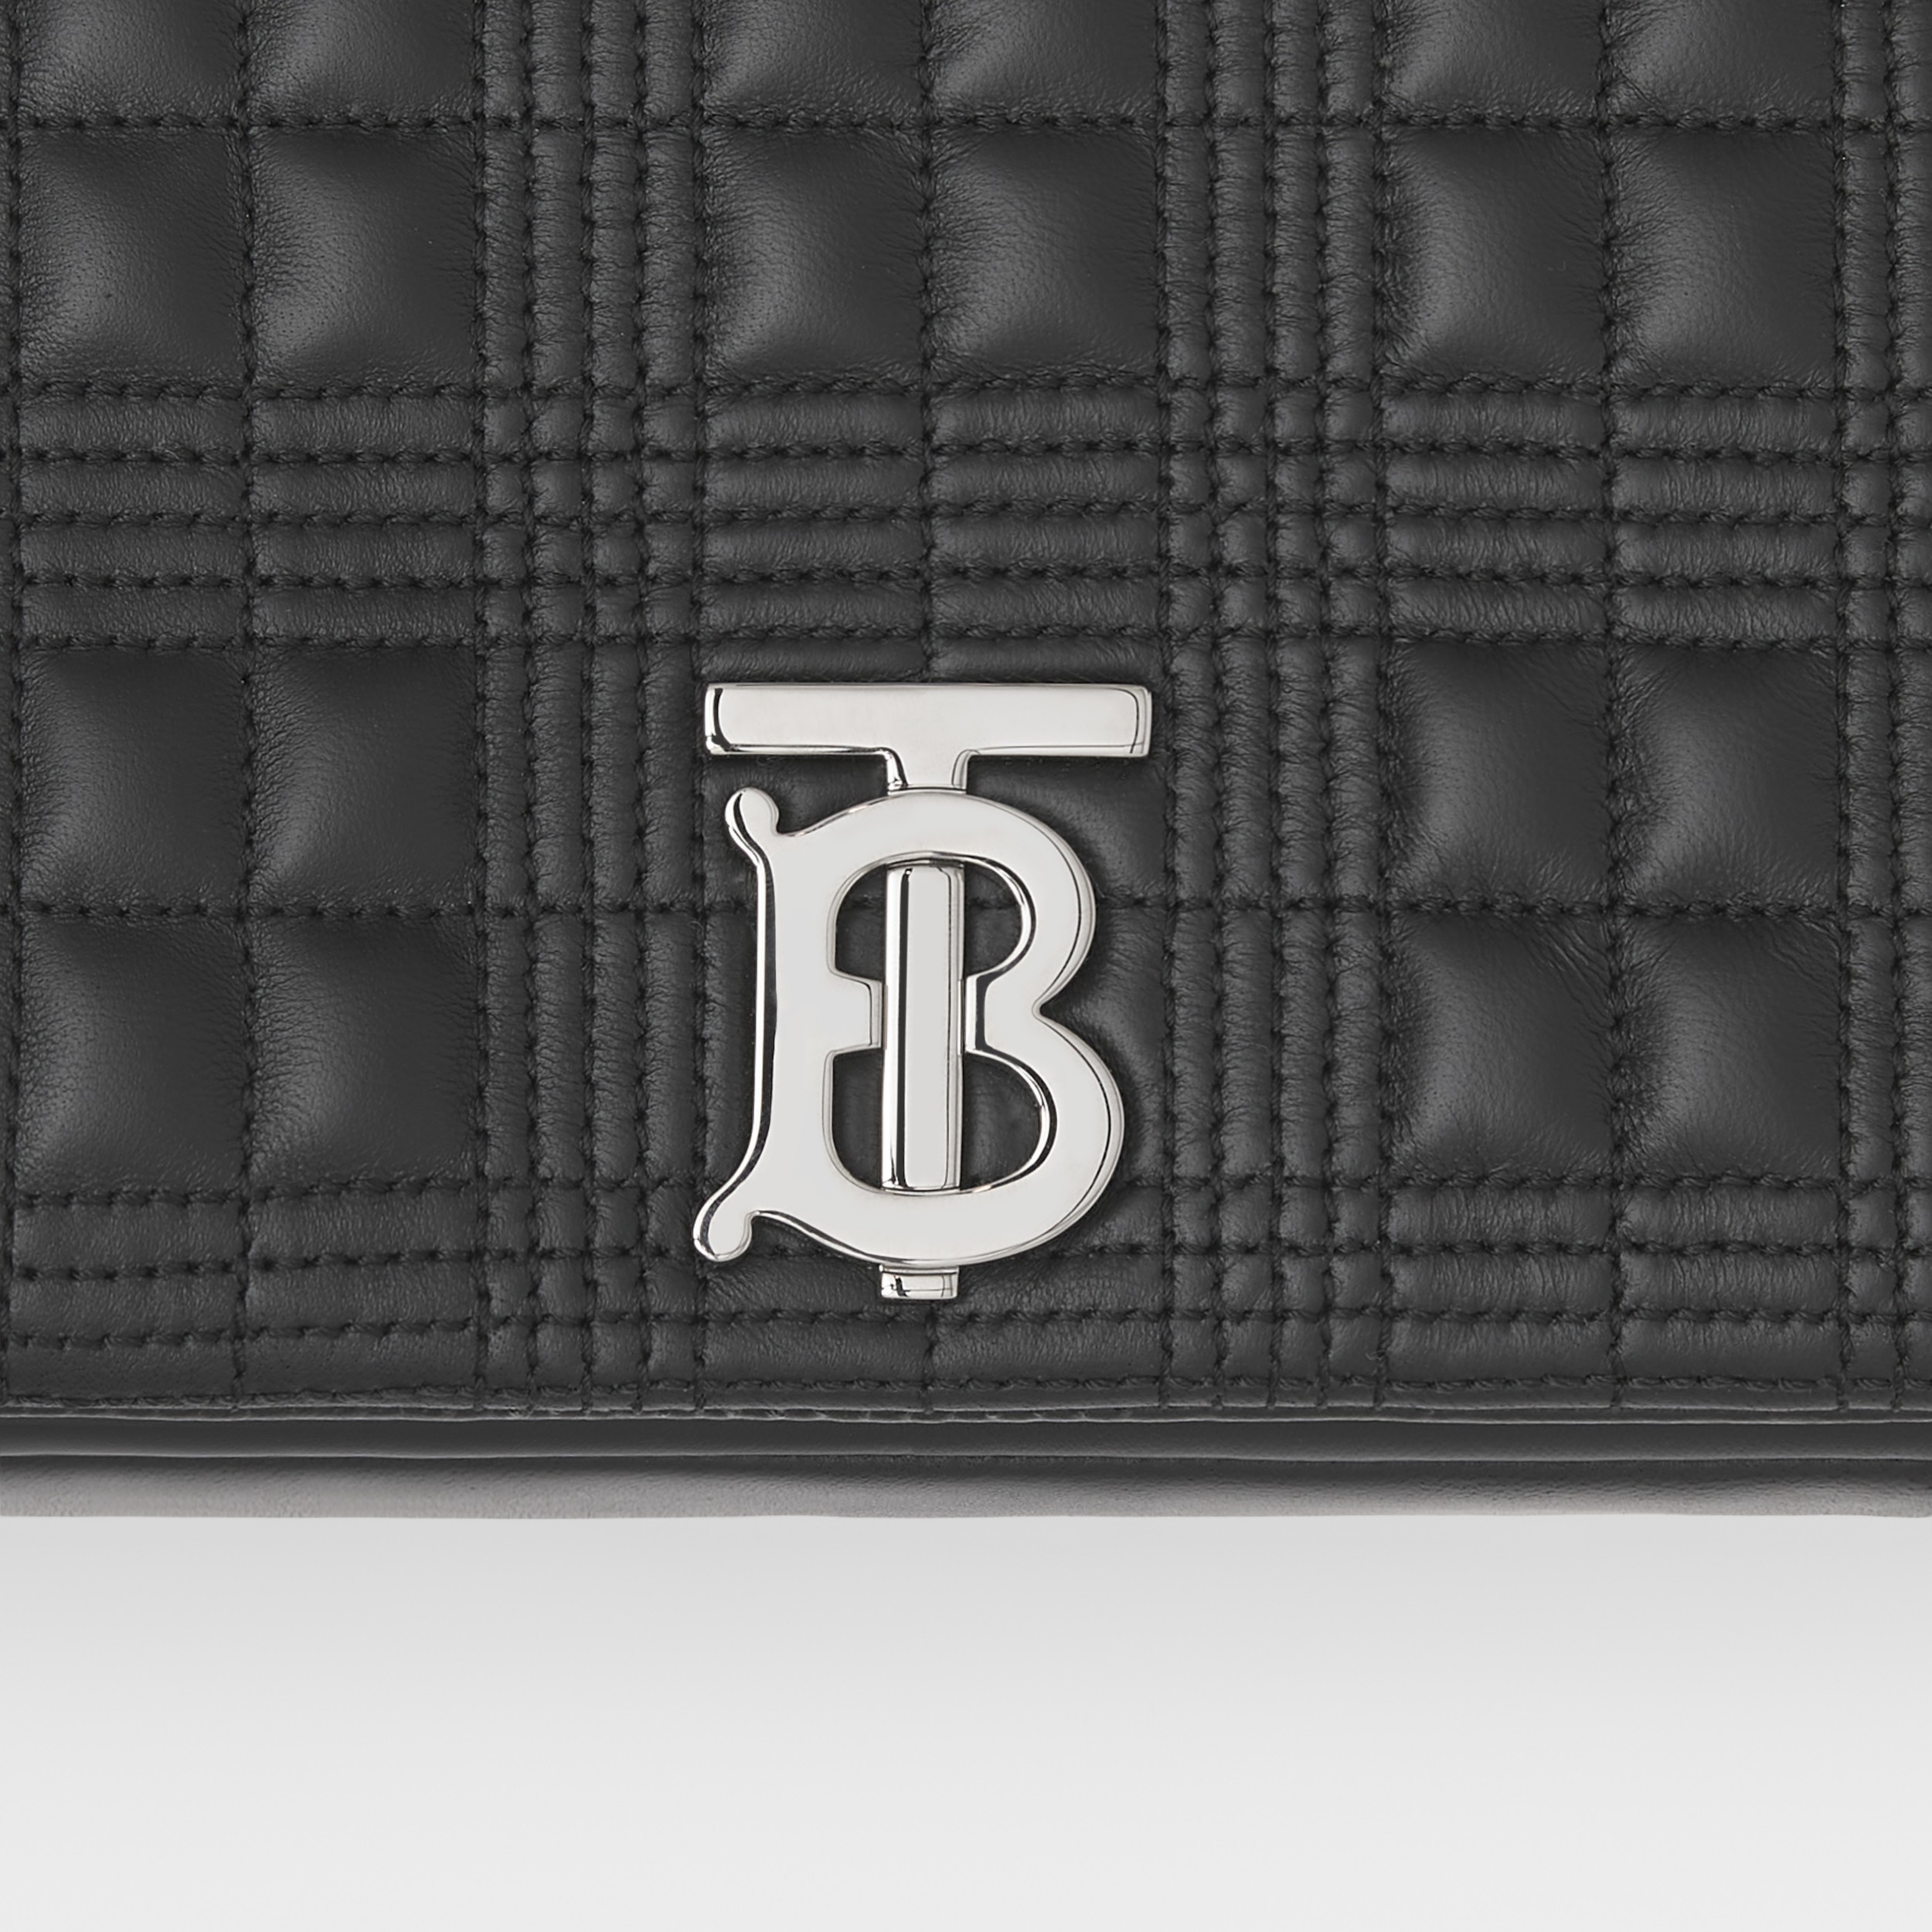 Quilted Leather Small Lola Bag in Black - Women | Burberry® Official